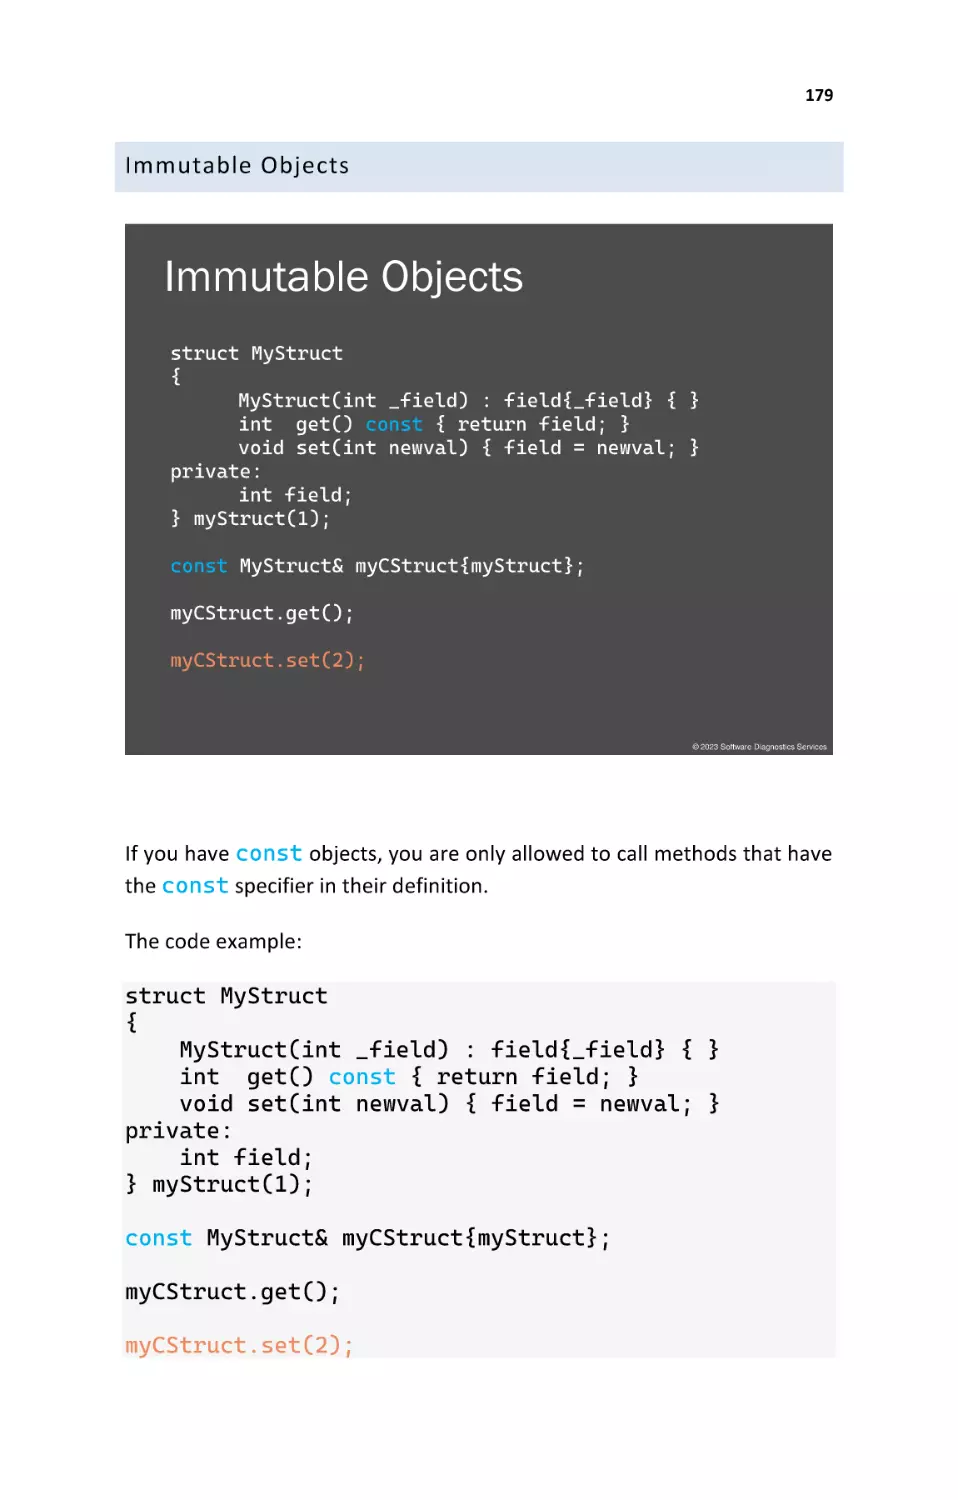 Immutable Objects